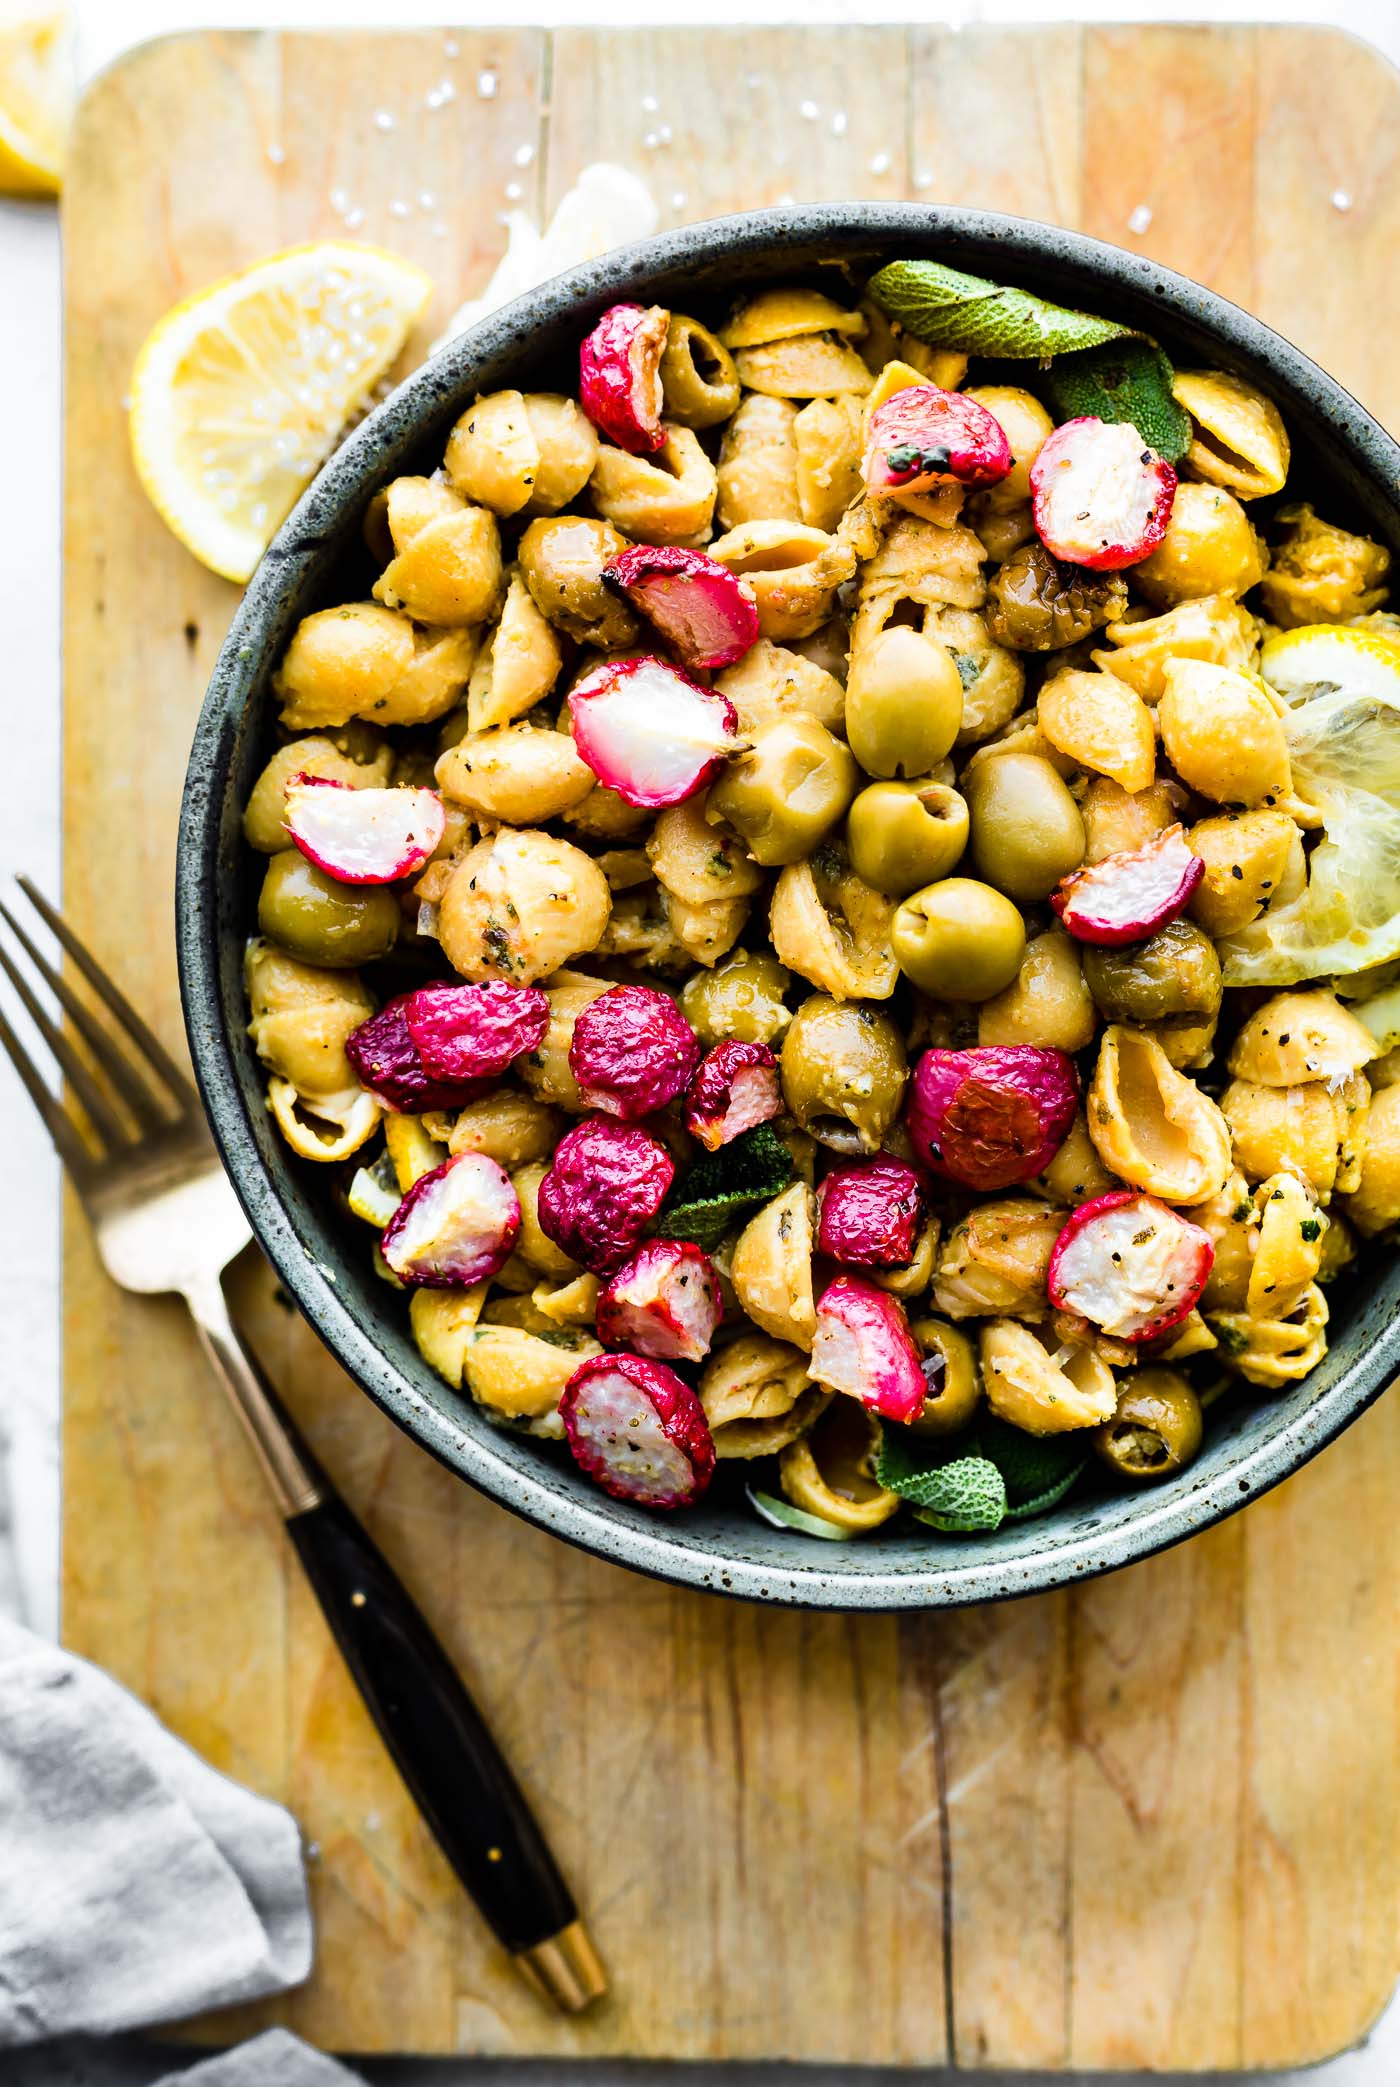 Roasted Radish Lemon Chickpea Pasta with olives! This vegan chickpea pasta recipe is packed with lemony flavor, making it the perfect light, gluten free pasta dinner for summer! #pasta #vegan #healthy #glutenfree #dinner #cleaneating 